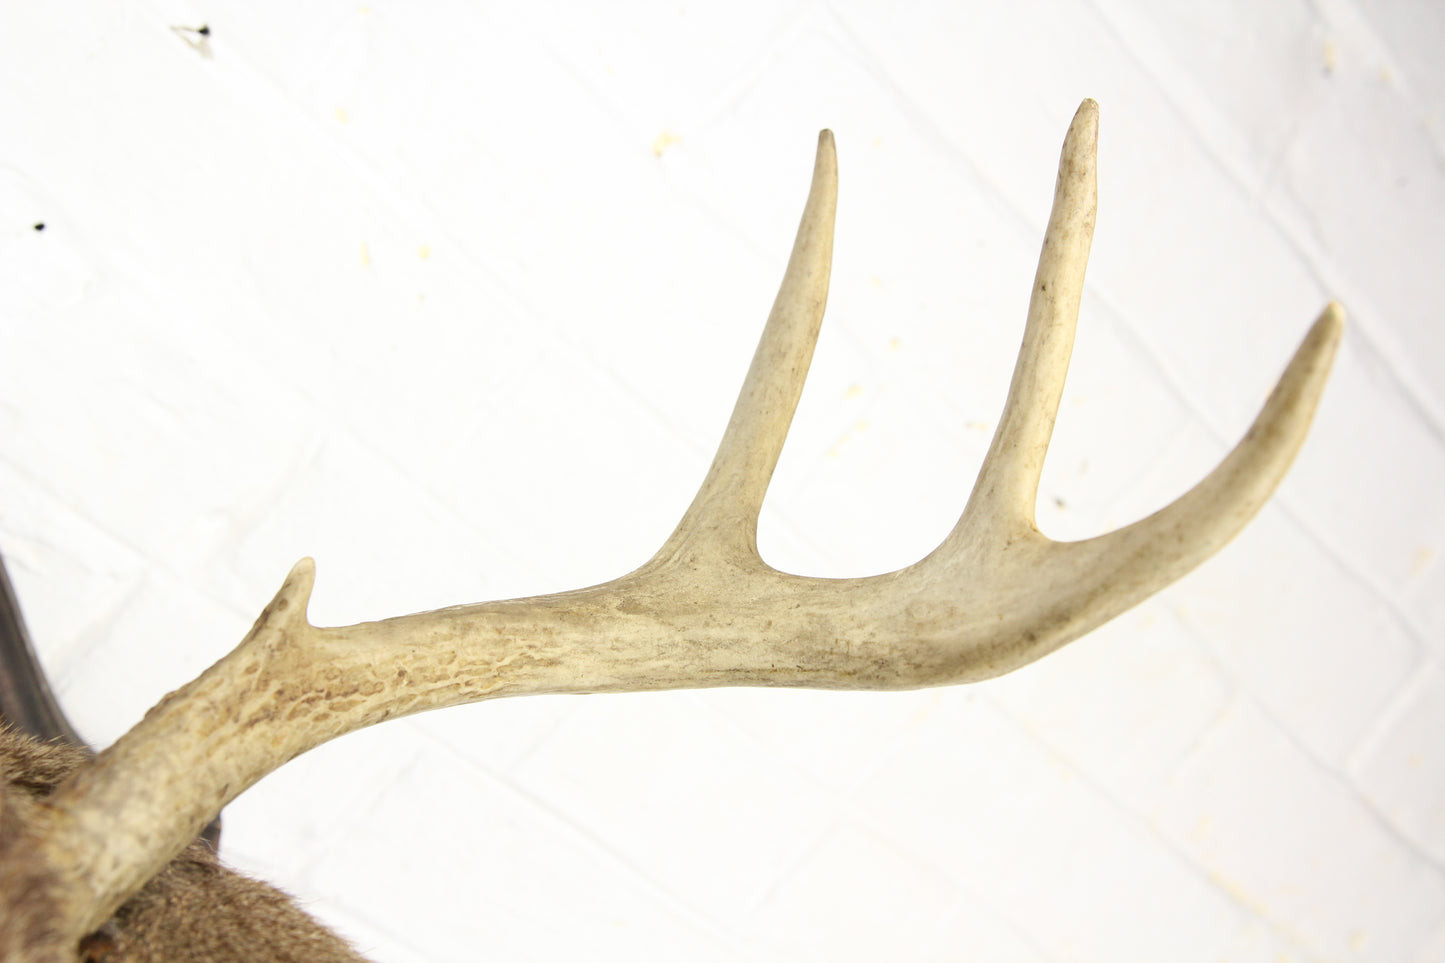 Antique Whitetail Deer 6-Point Buck Taxidermy Mount on Wood Shield